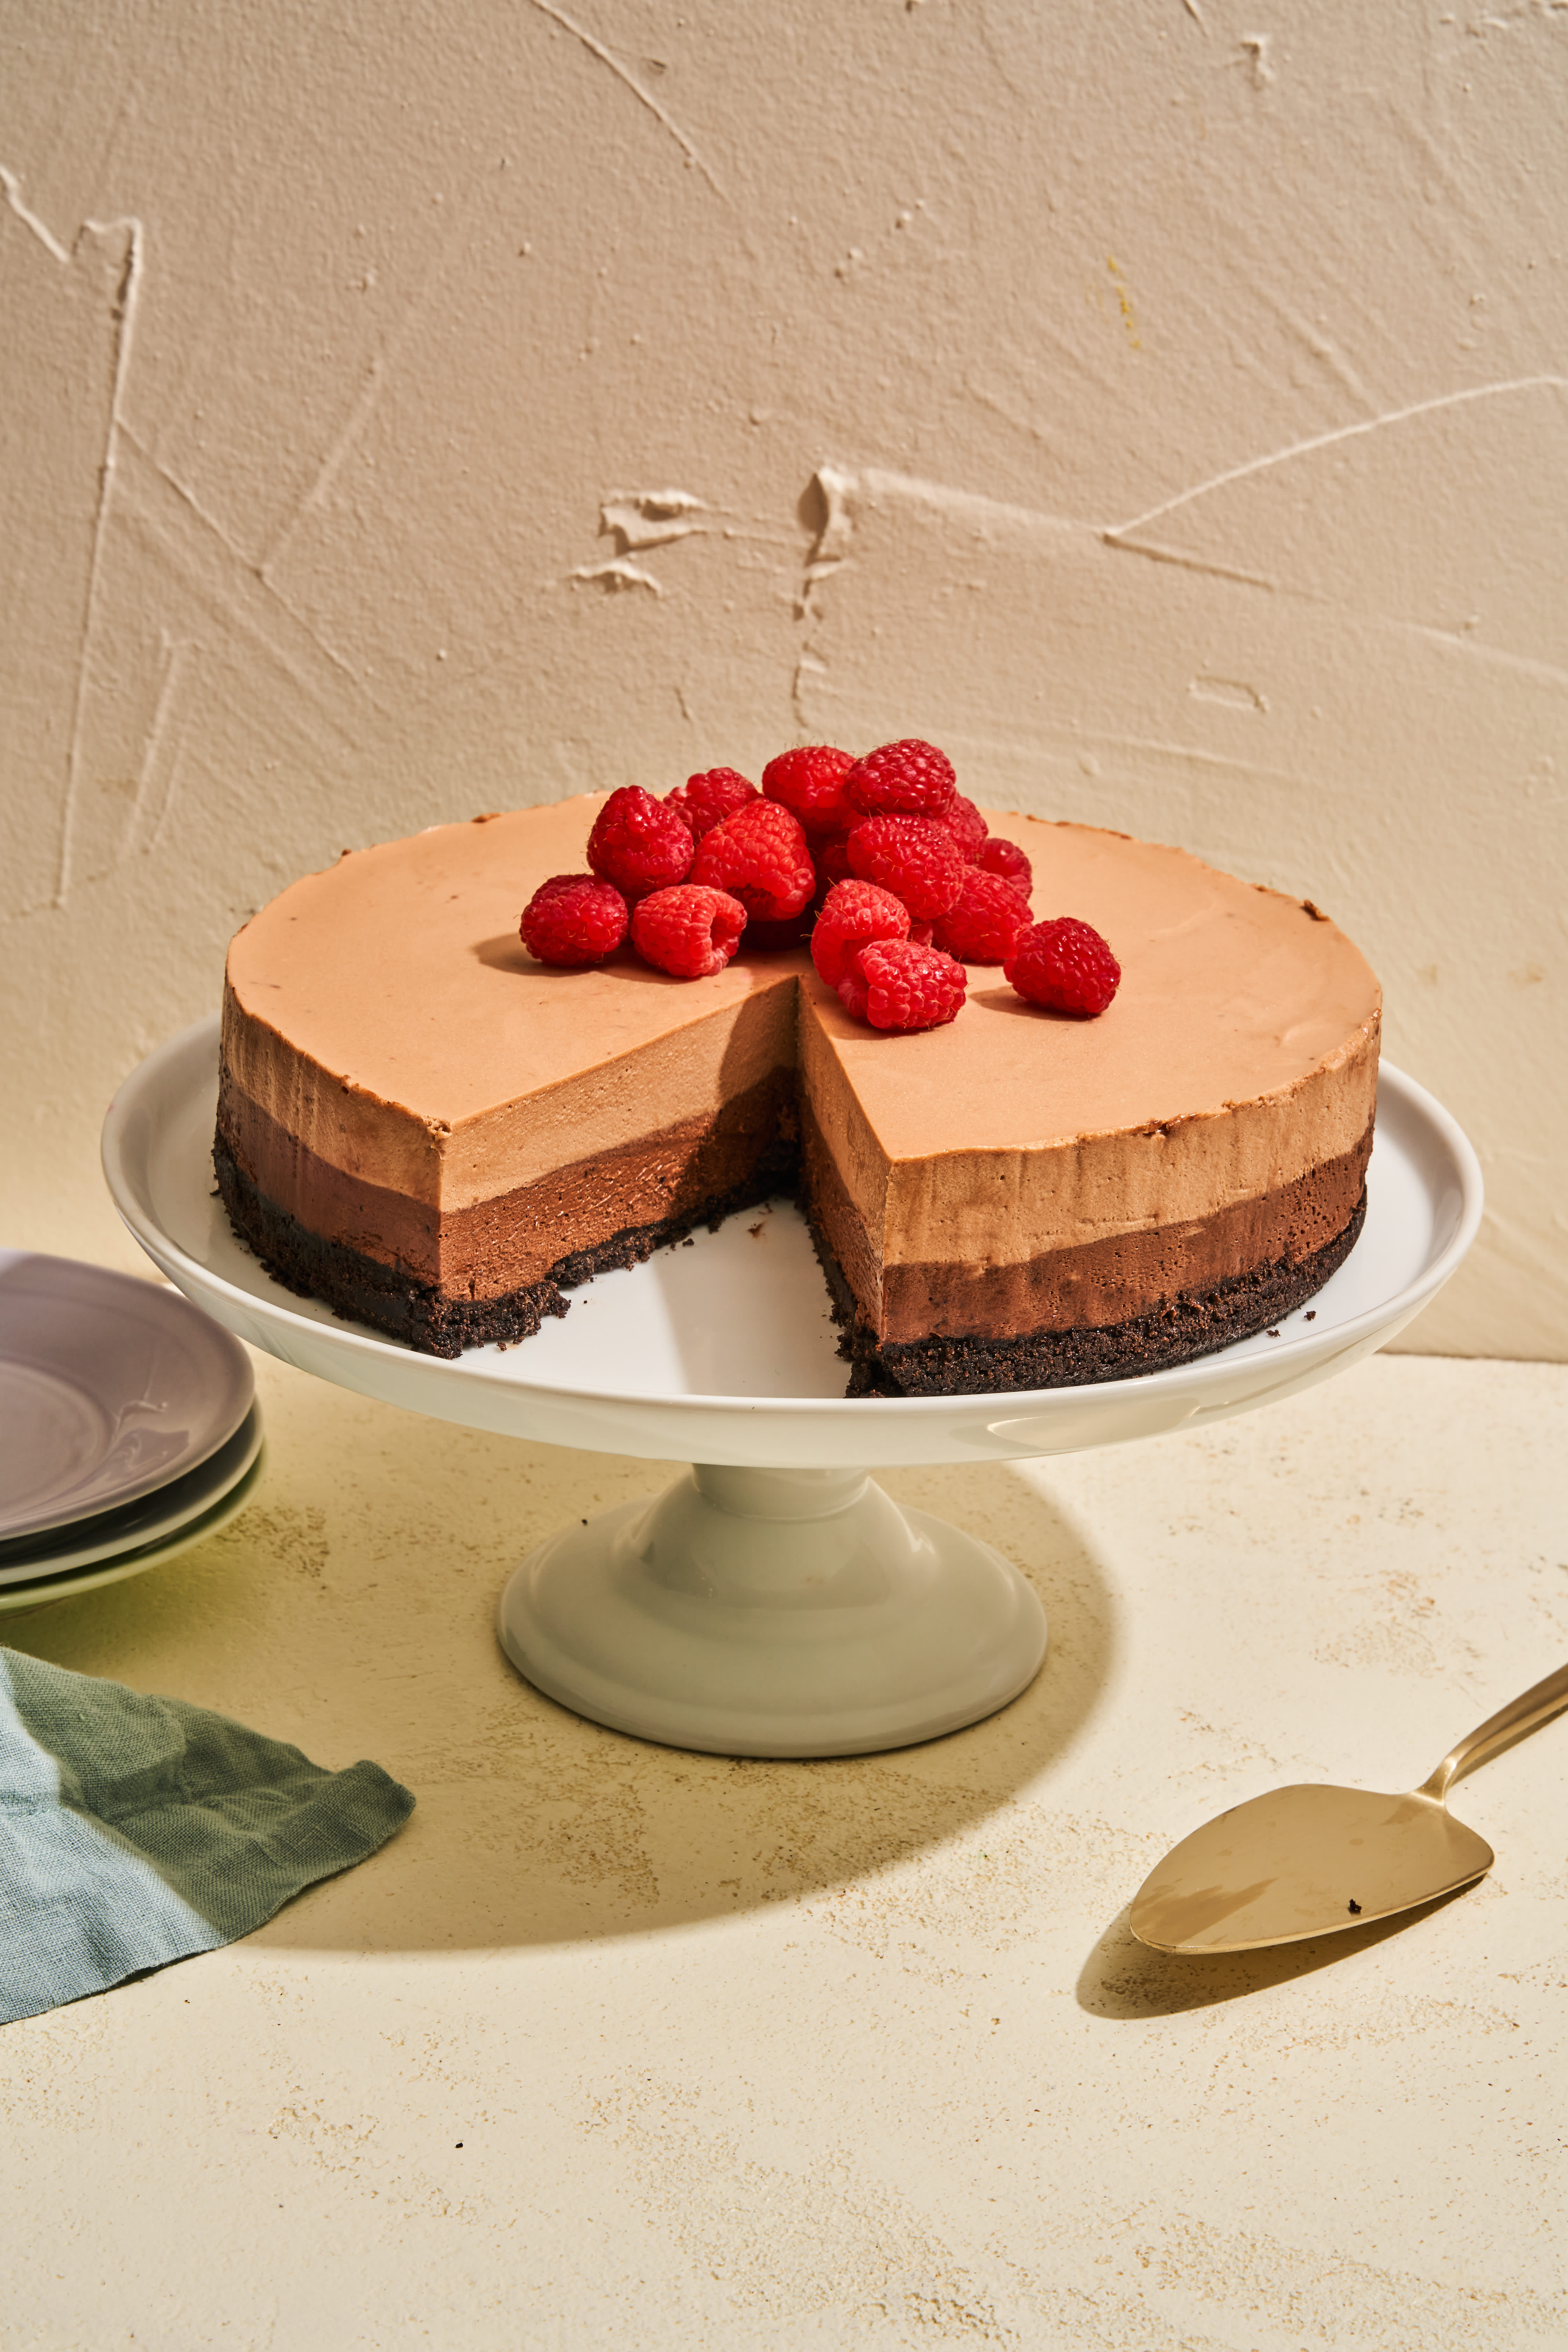 Chocolate Mousse Cheesecake Recipe by Tasty